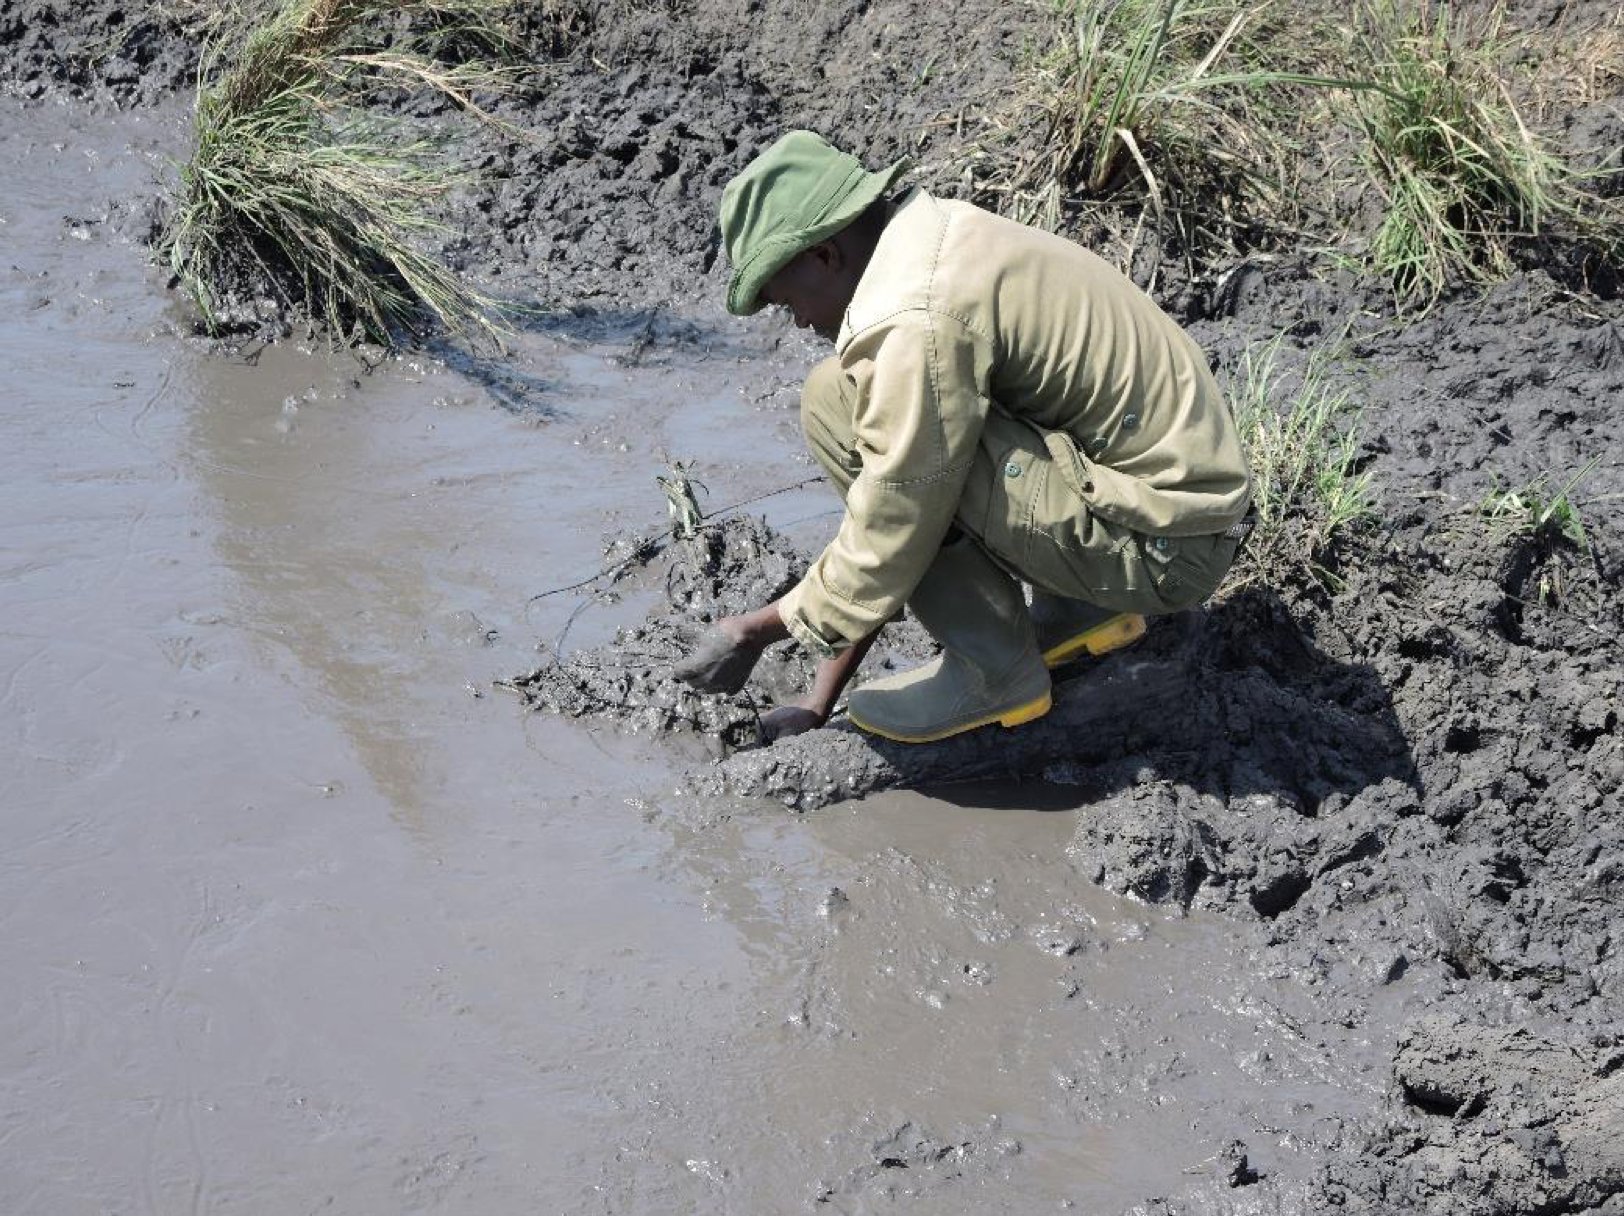  Removing a snare that was set by poachers by a waterhole. 